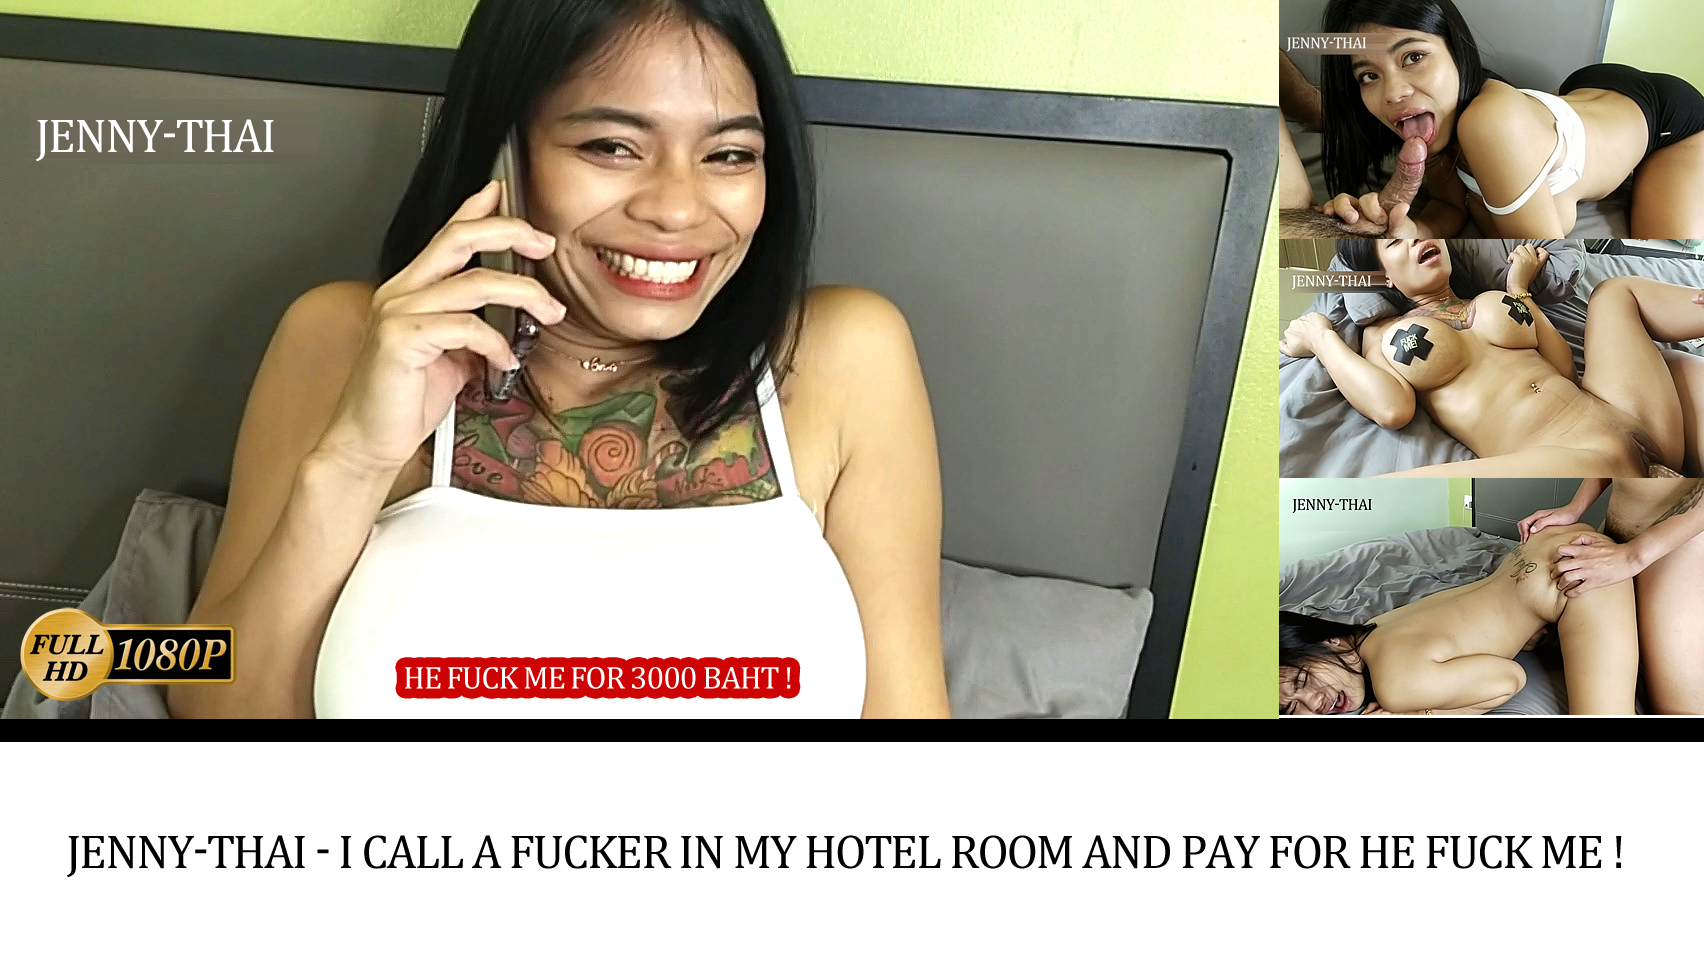 Jenny-Thai- I call a fucker in my Hotel room and pay for he fuck me !